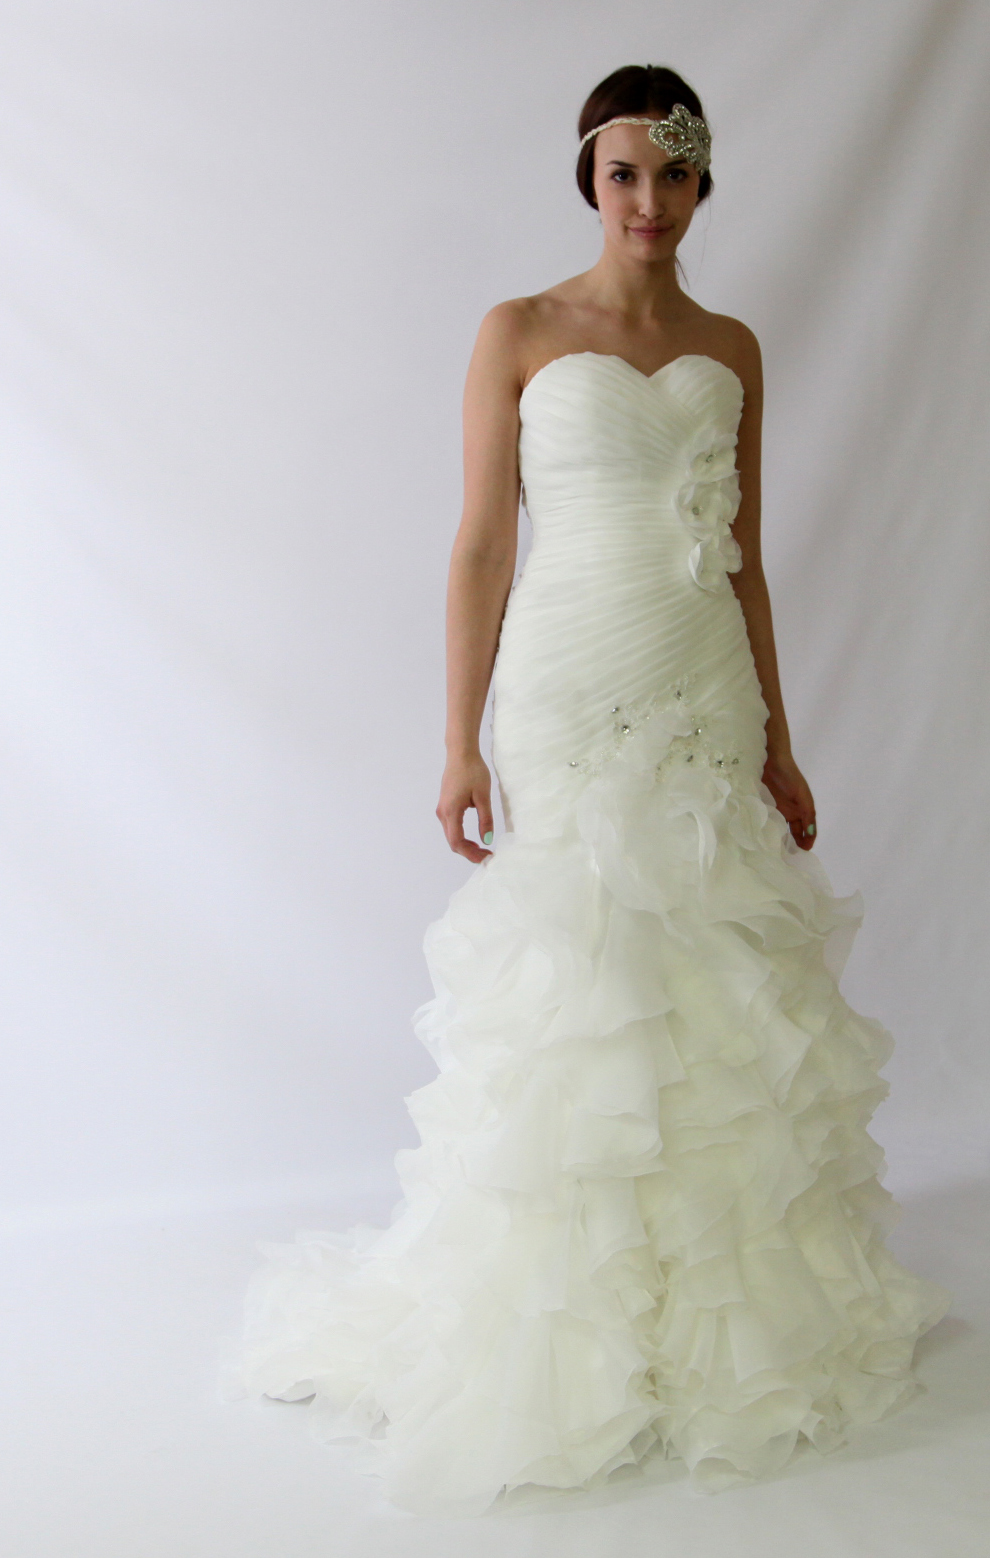 MeJeanne Couture Custom Wedding Gown Collection